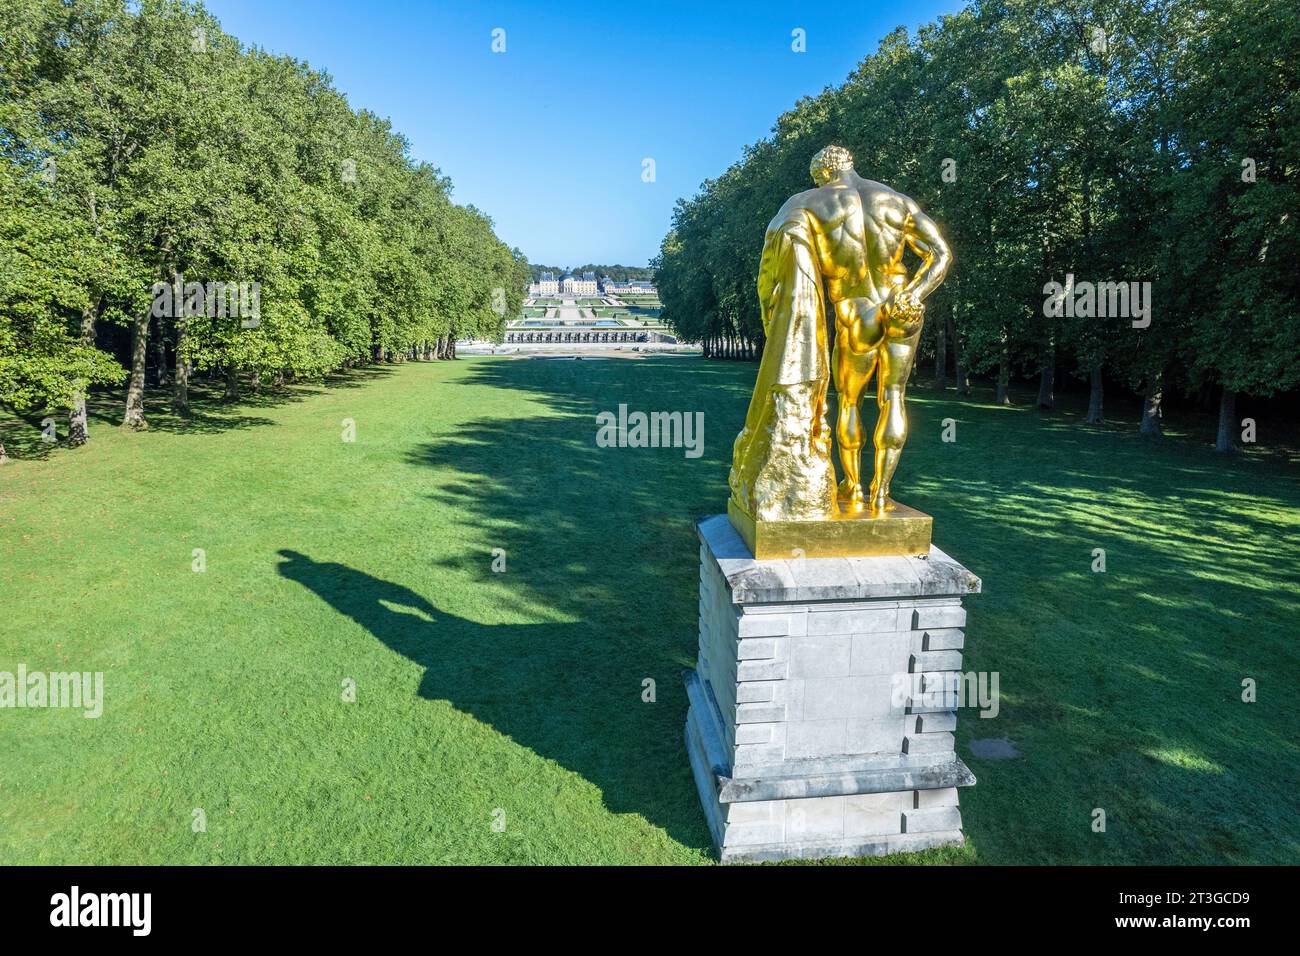 France, Seine et Marne, Maincy, Vaux le Vicomte castle, sculpture of Hercule Farnese in the castle park, formal gardens designed by Andre Le Notre and southern facde of the castle in the background Stock Photo